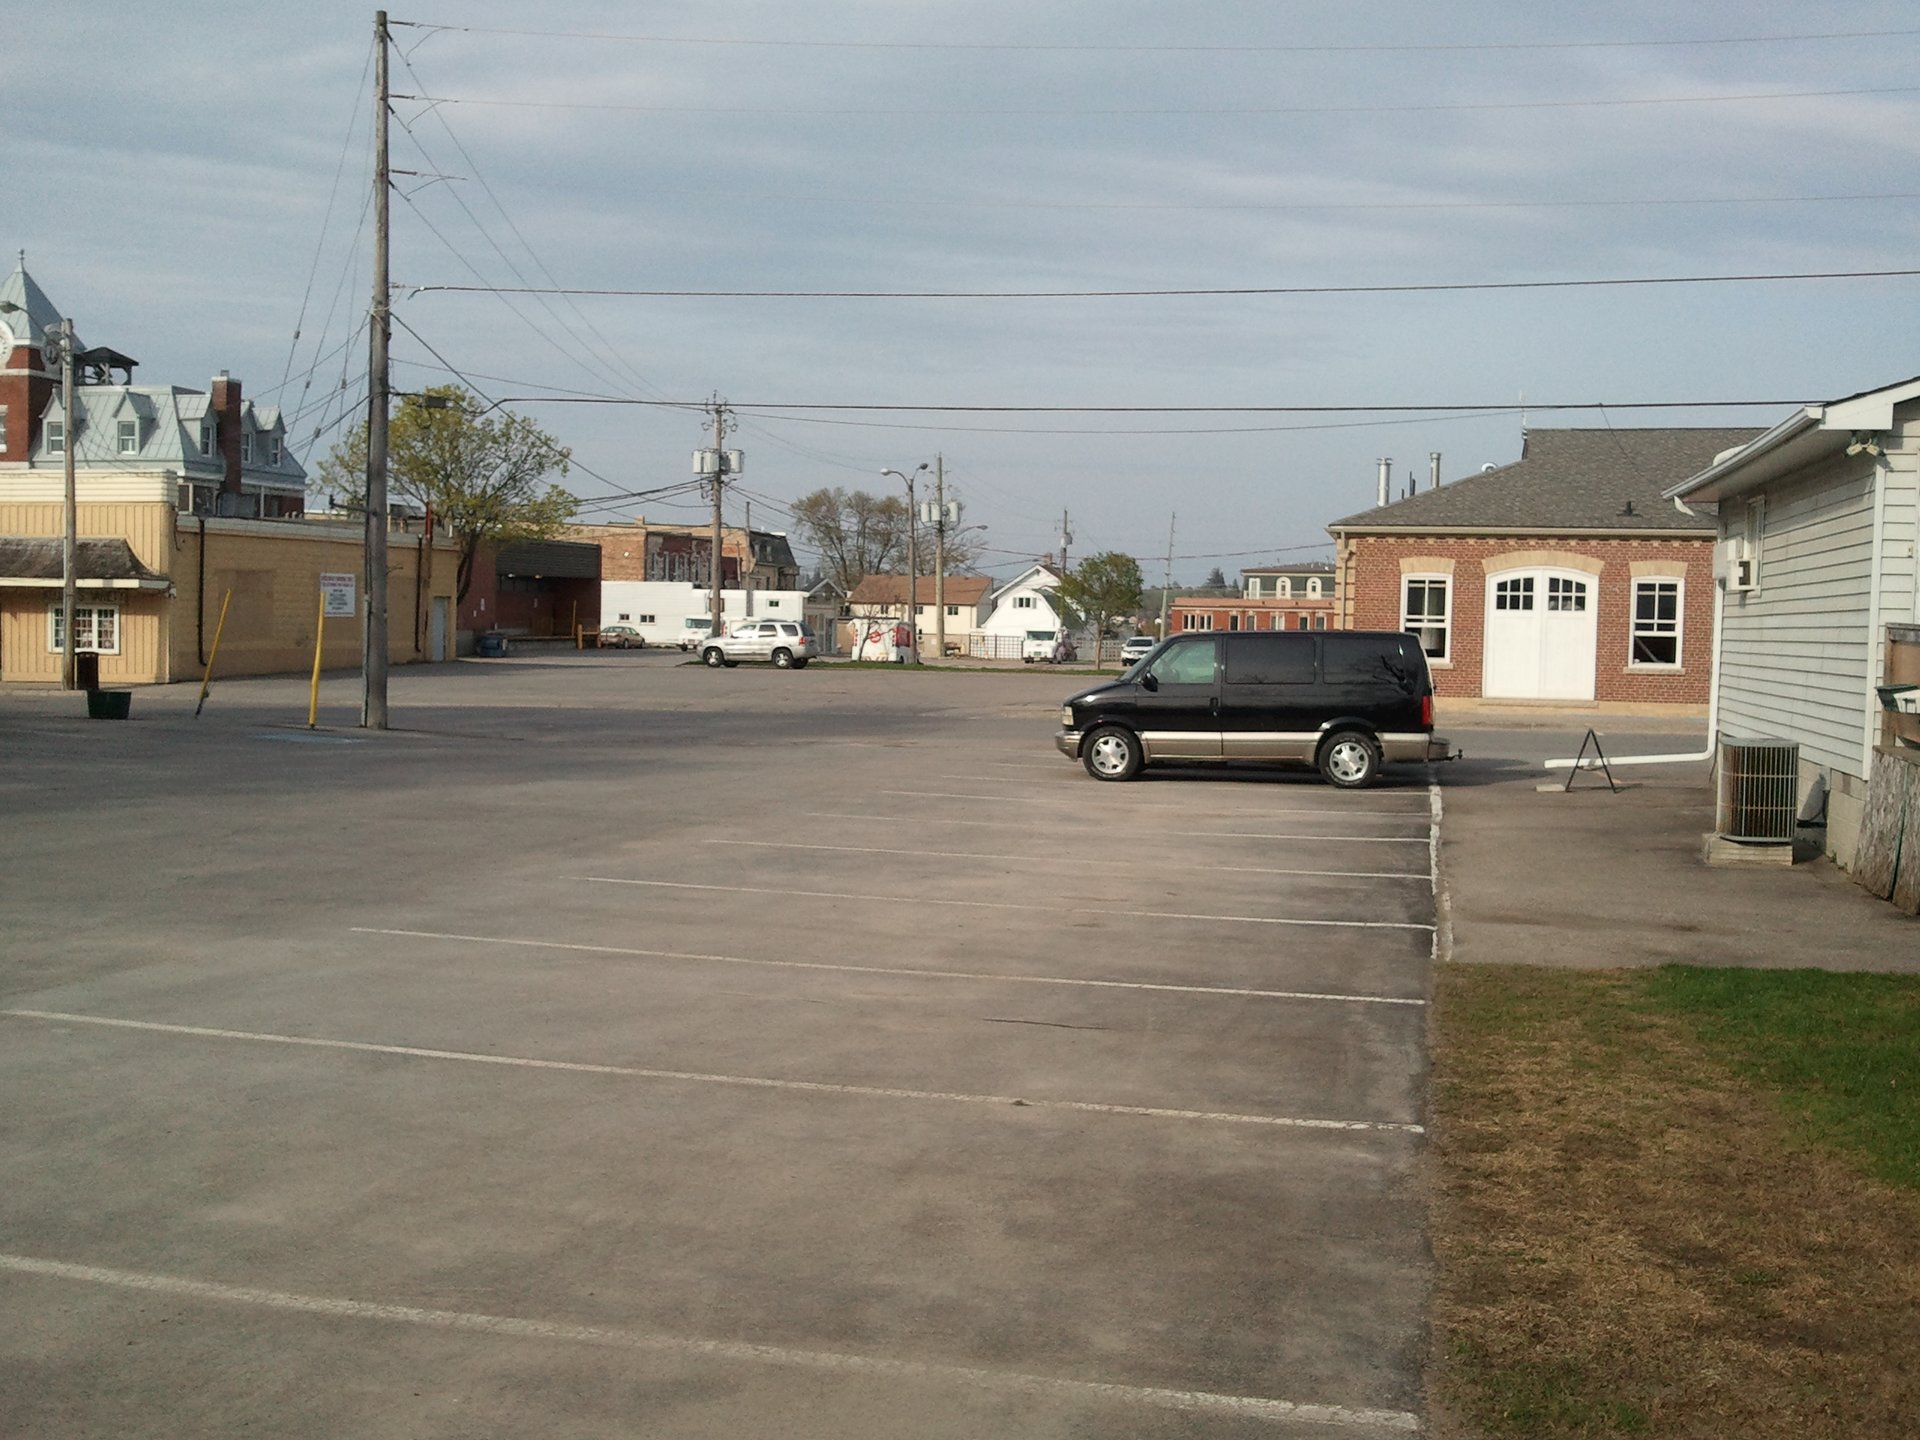 Parking Lot View of Wagg Funeral Home